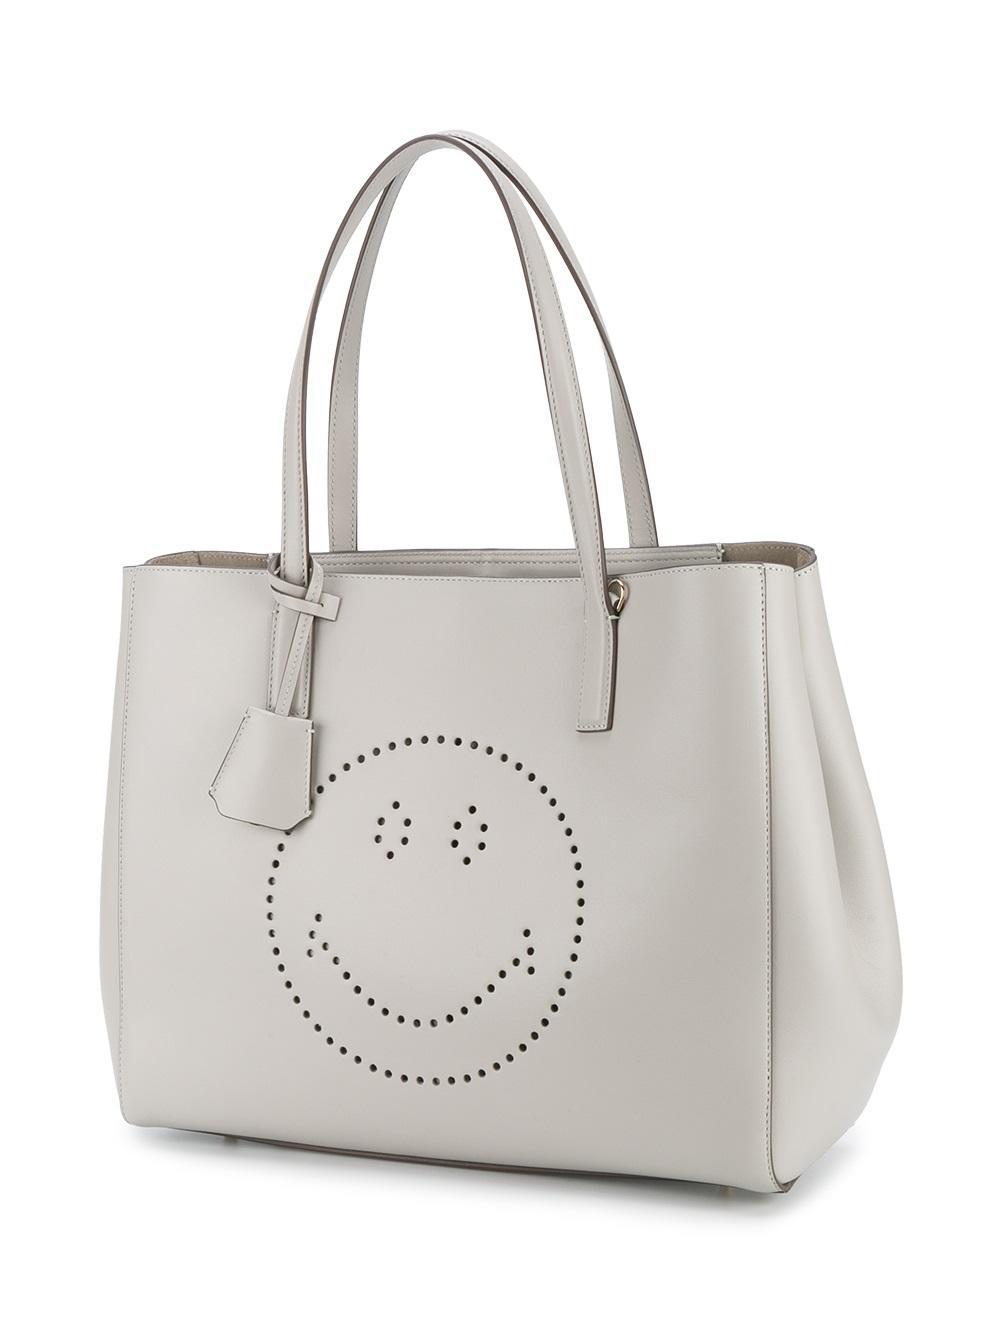 Lyst - Anya Hindmarch Smiley Face Tote Bag in Gray